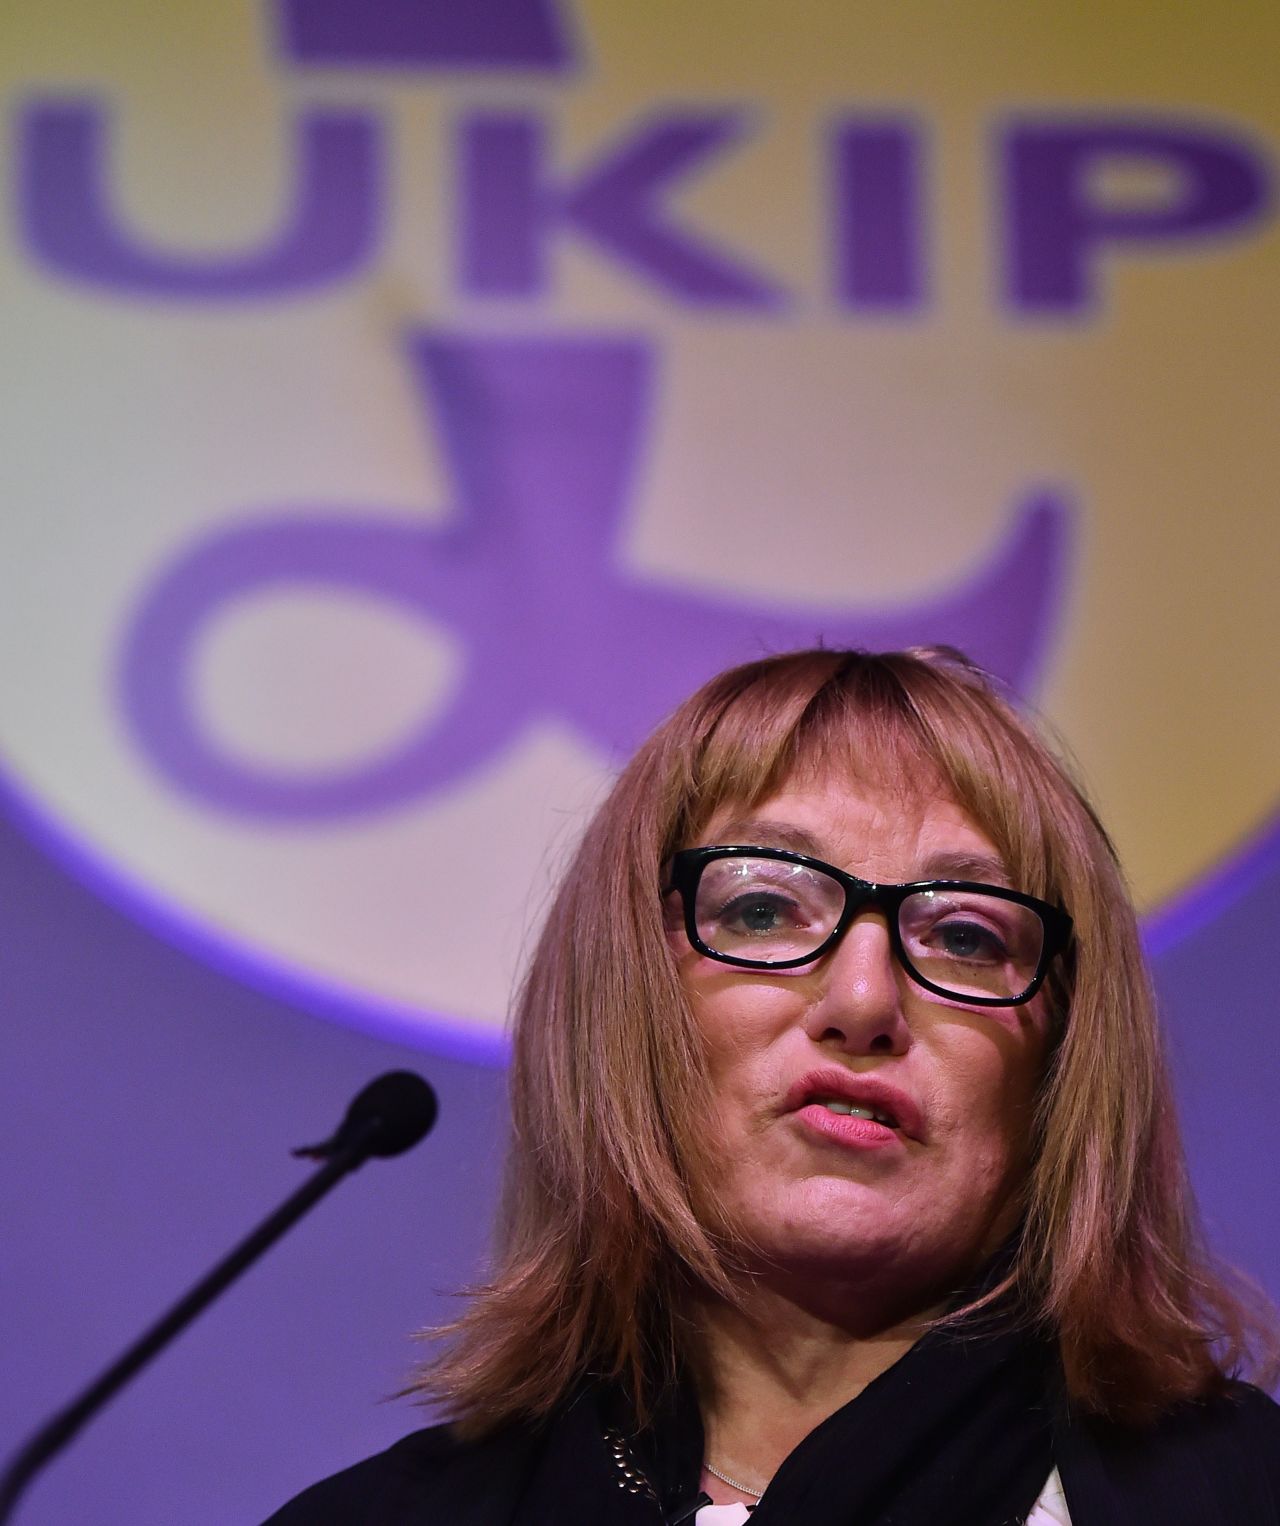 Here, Maloney gives a speech at a United Kingdom Independence Party (UKIP) conference in February 2015. Maloney has since left the right-wing Eurosceptic party, saying: "I am no longer a member, due to their beliefs."<br />As a UKIP candidate for the London mayoral election in 2004, Maloney (then Frank) attracted criticism after refusing to campaign in the borough of Camden because there were "too many gays."<br />Today, Maloney "wholeheartedly apologizes" for the comments.<br />"I totally regret making them and I'll have to live with them forever," she told CNN. "But at the time I was living a life with blinkers on. I used to live in a world where my mouth opened before my brain did. If I could go back in time and take those words back, I would." 